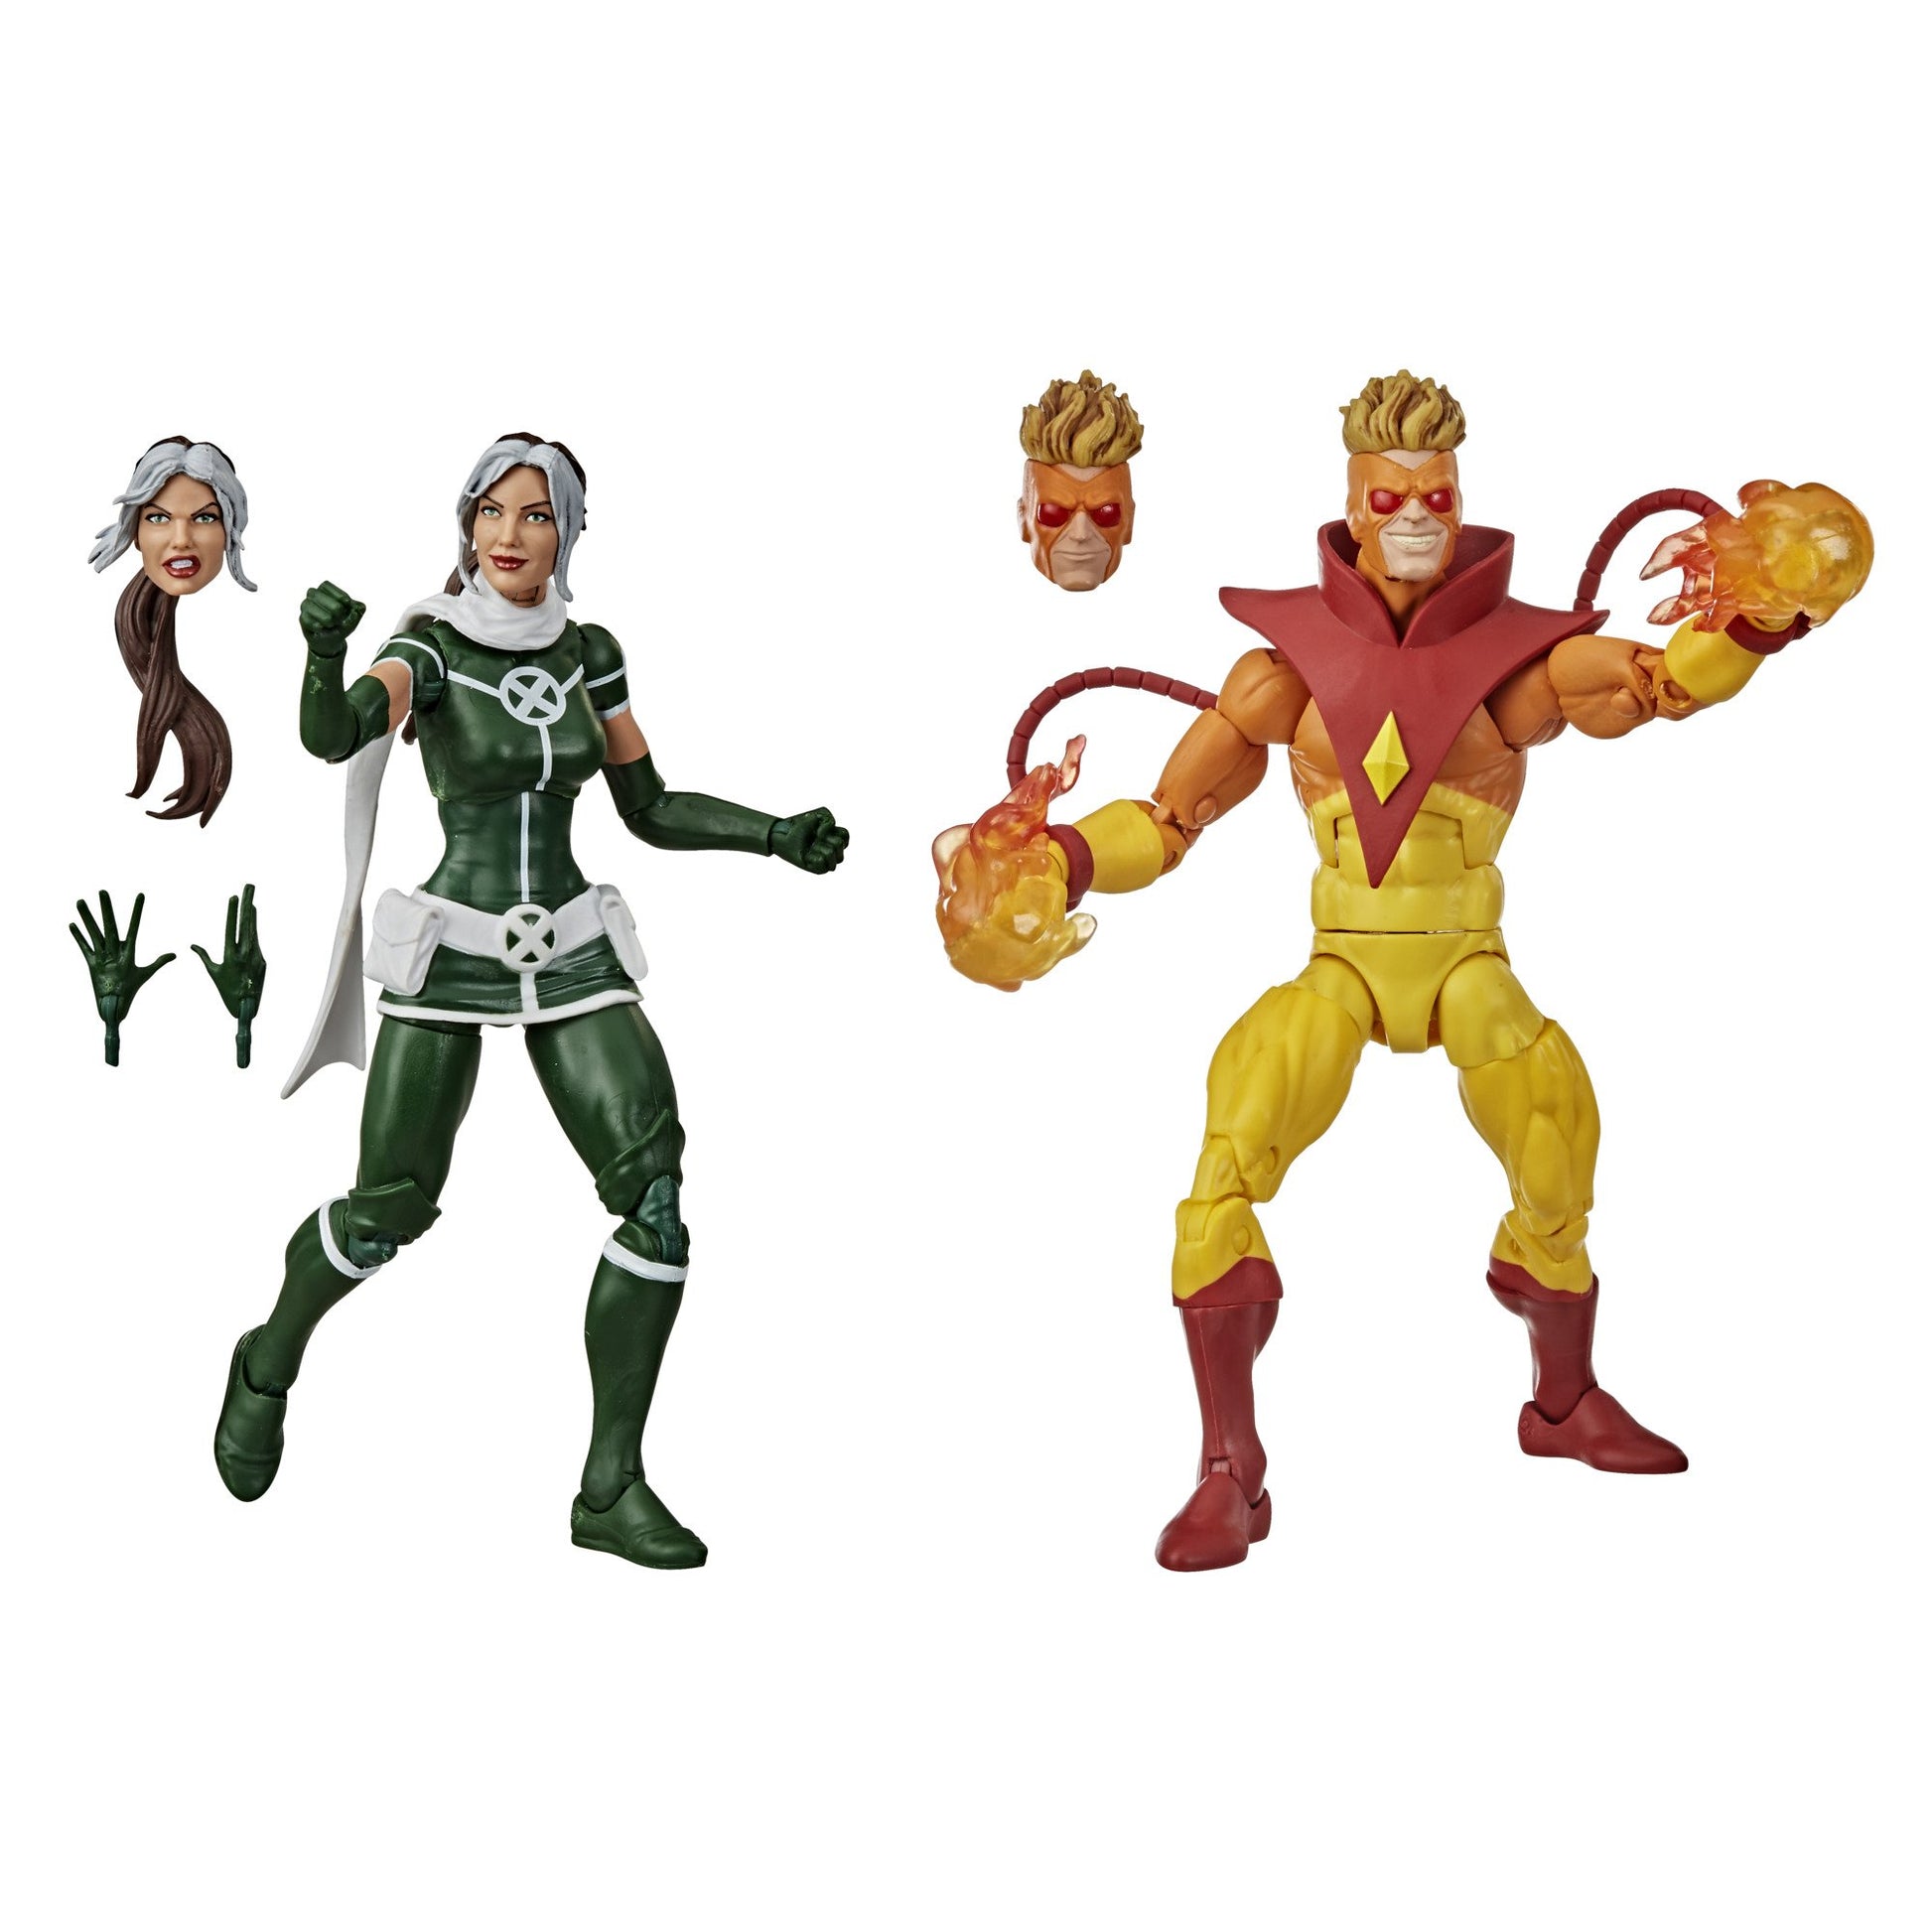 Hasbro Marvel Legends Series Brotherhood of Evil Mutants Rogue and Pyro figures with accessories